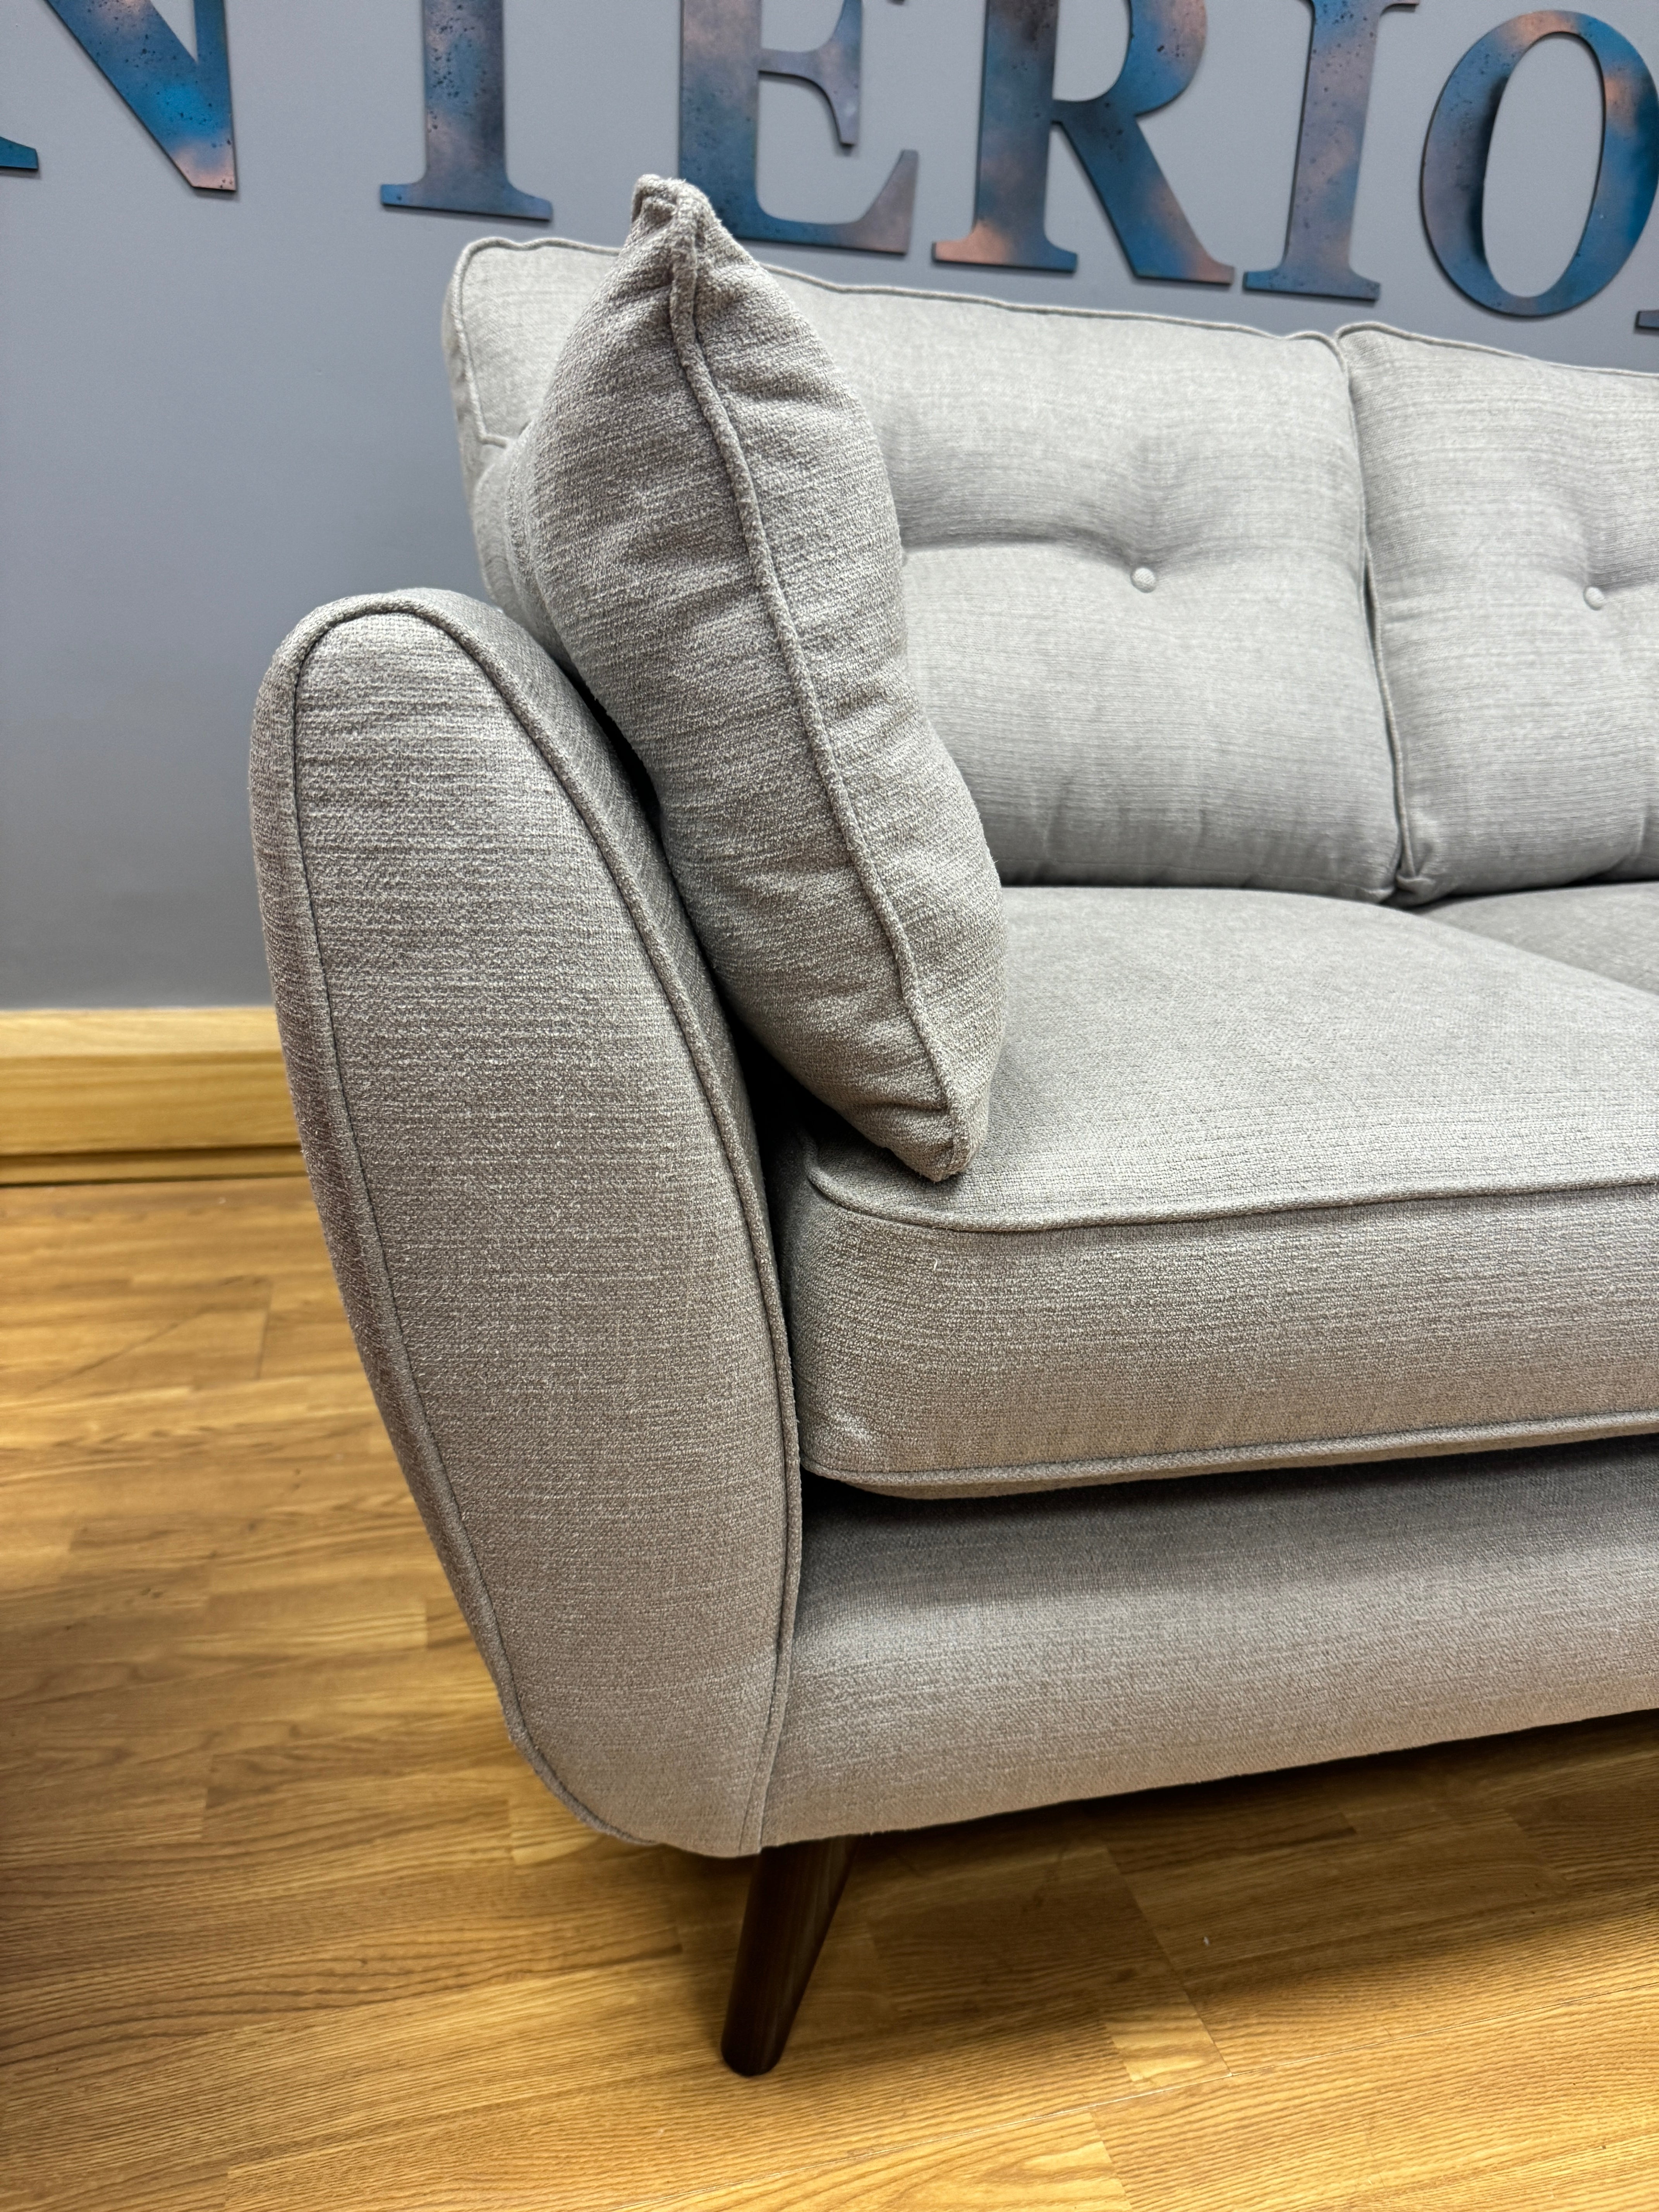 WHITE LABEL ZINC 2 seater standard back sofa in Zenith Grey soft weave fabric